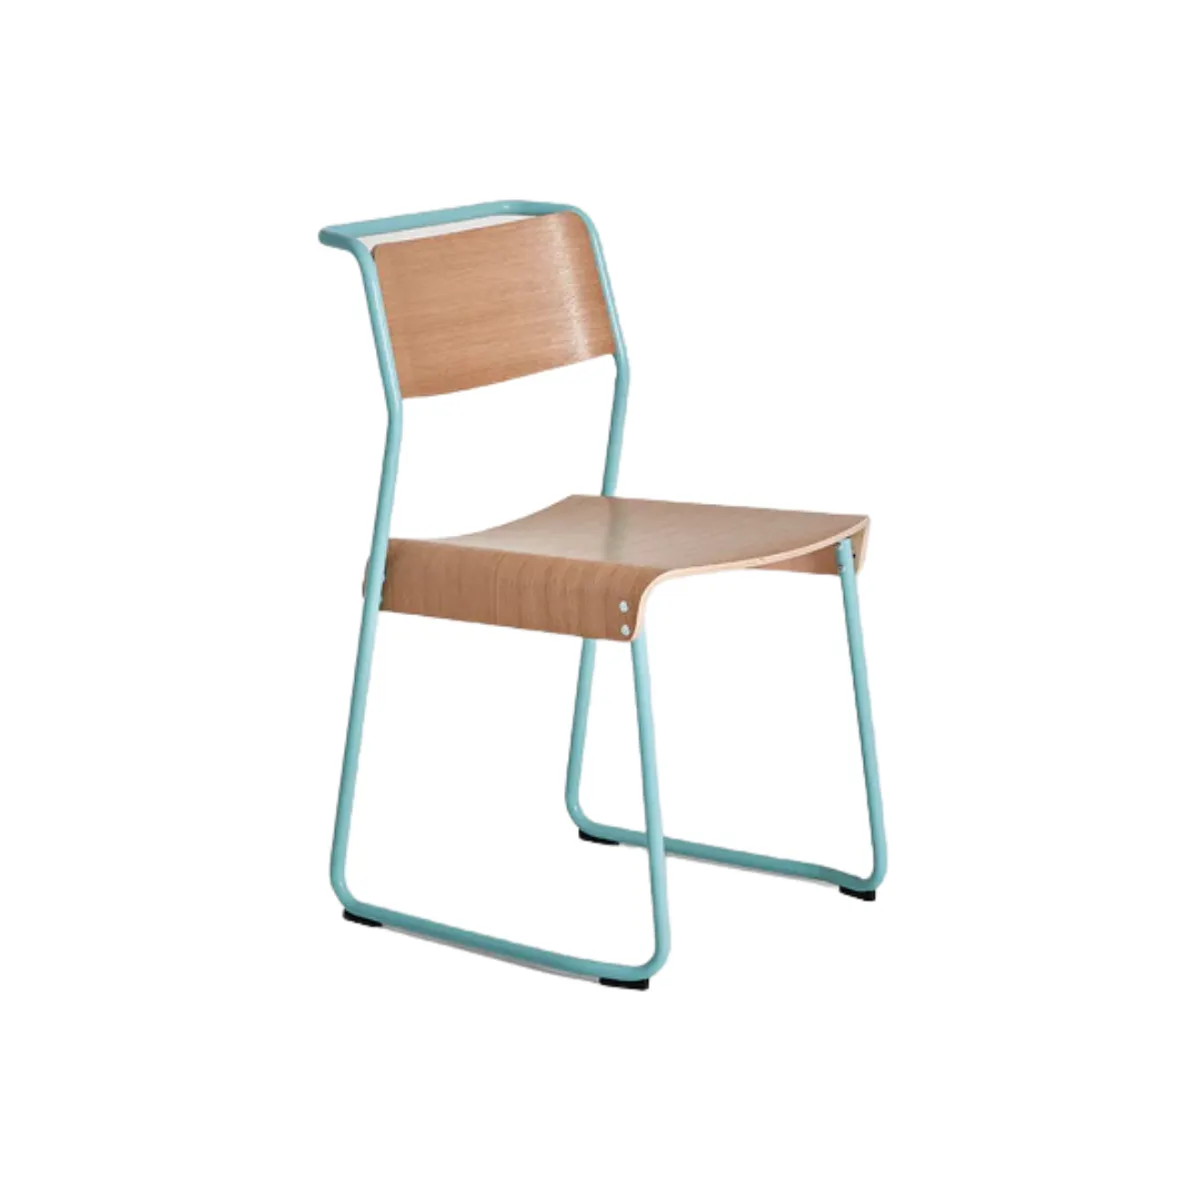 Utility side chair 5